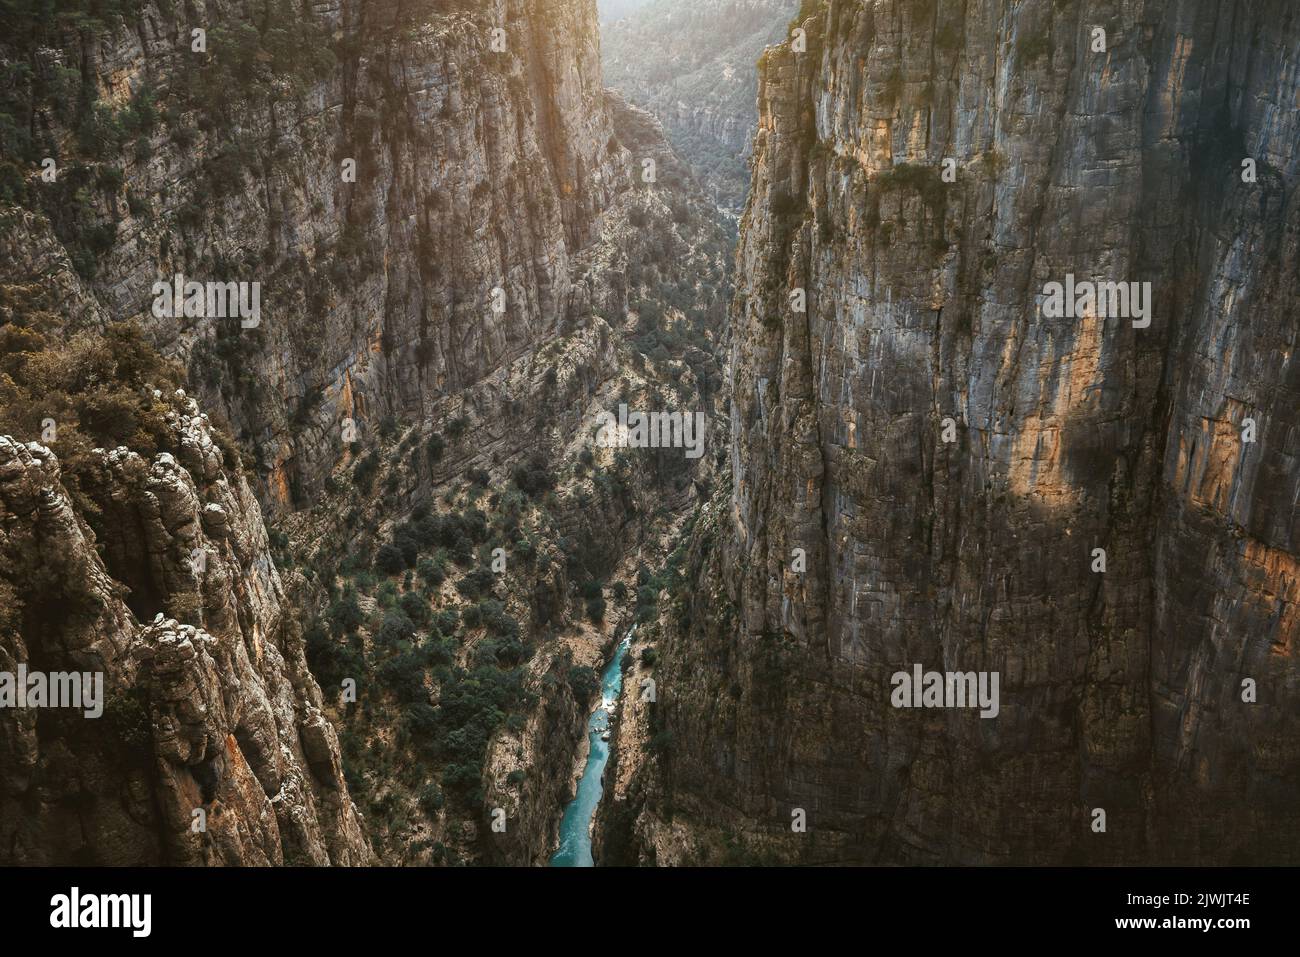 Aerial view Tazi canyon landscape mountains and river in Turkey wild nature scenery travel beautiful destinations Stock Photo